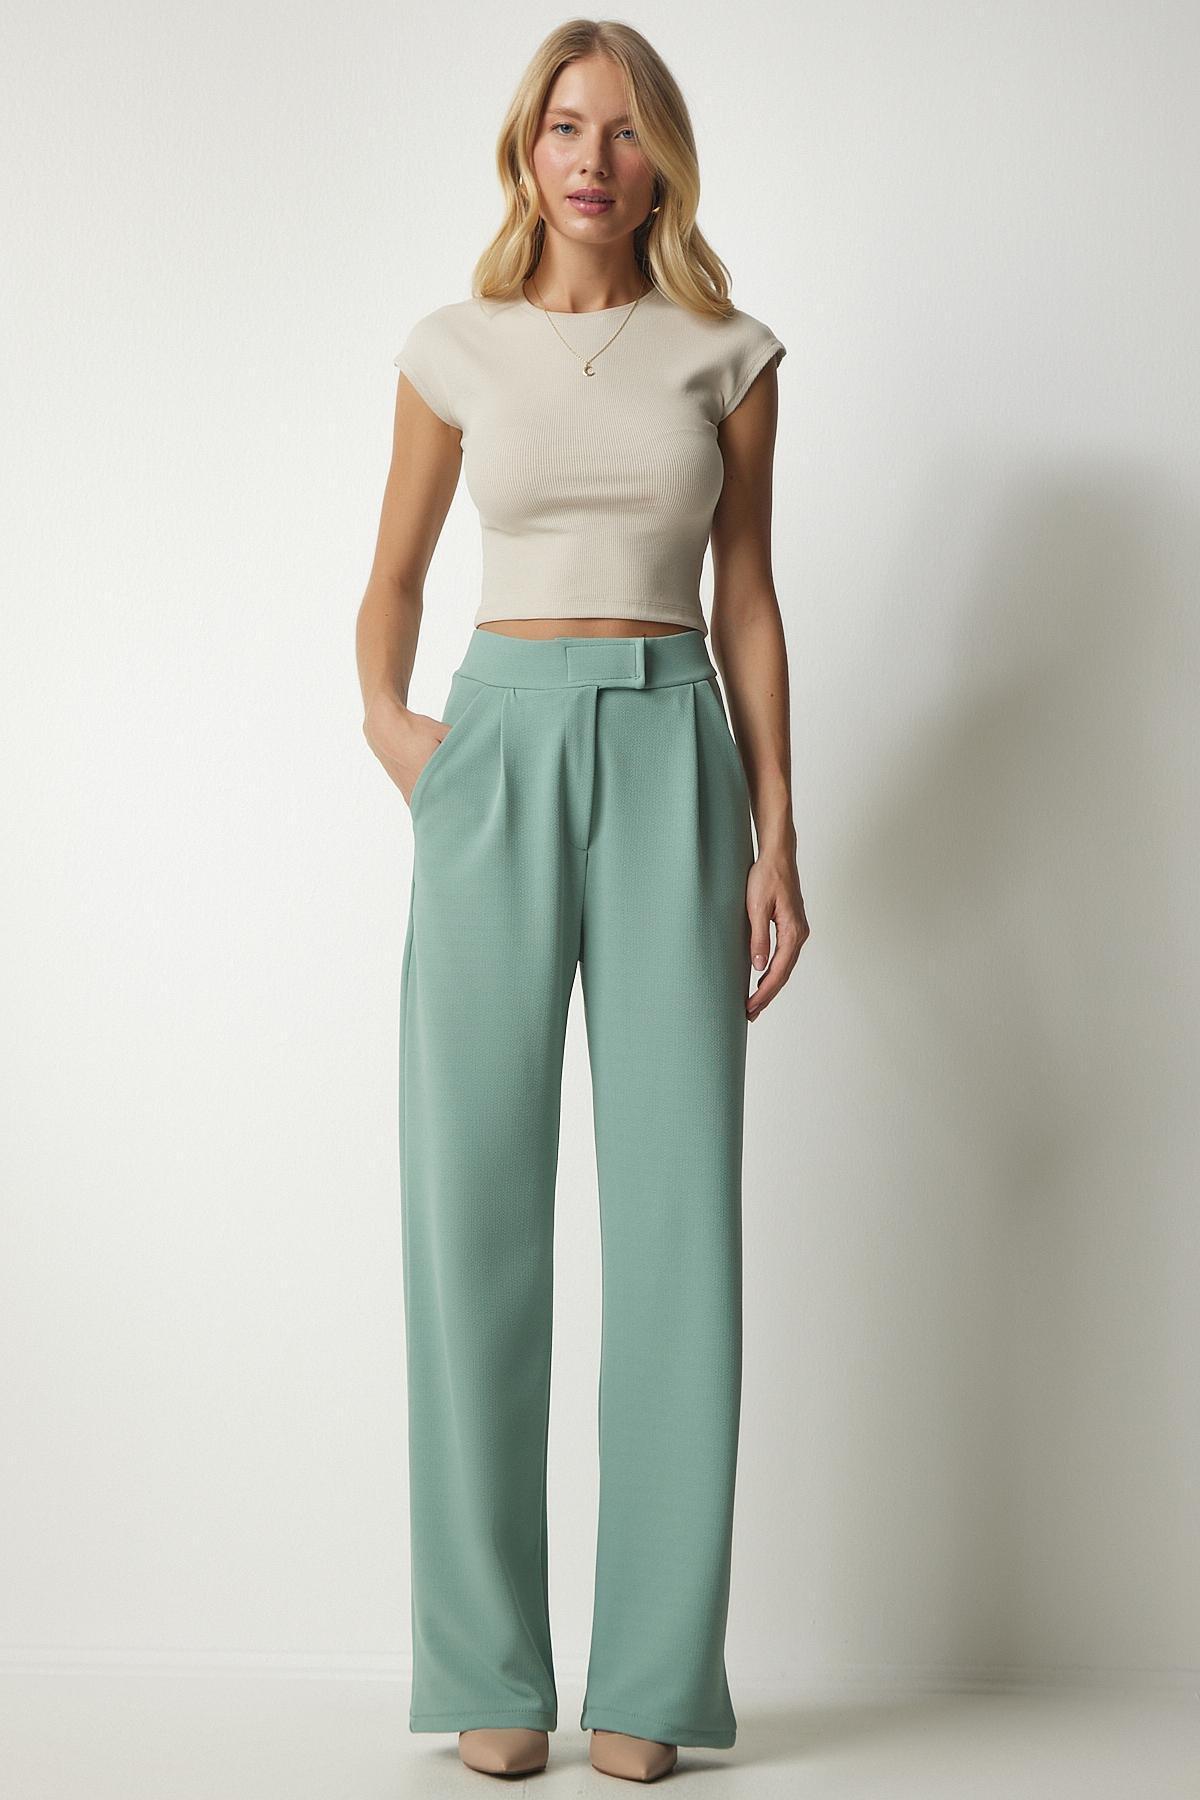 Happiness Istanbul - Green Comfortable Woven Trousers With A Waist